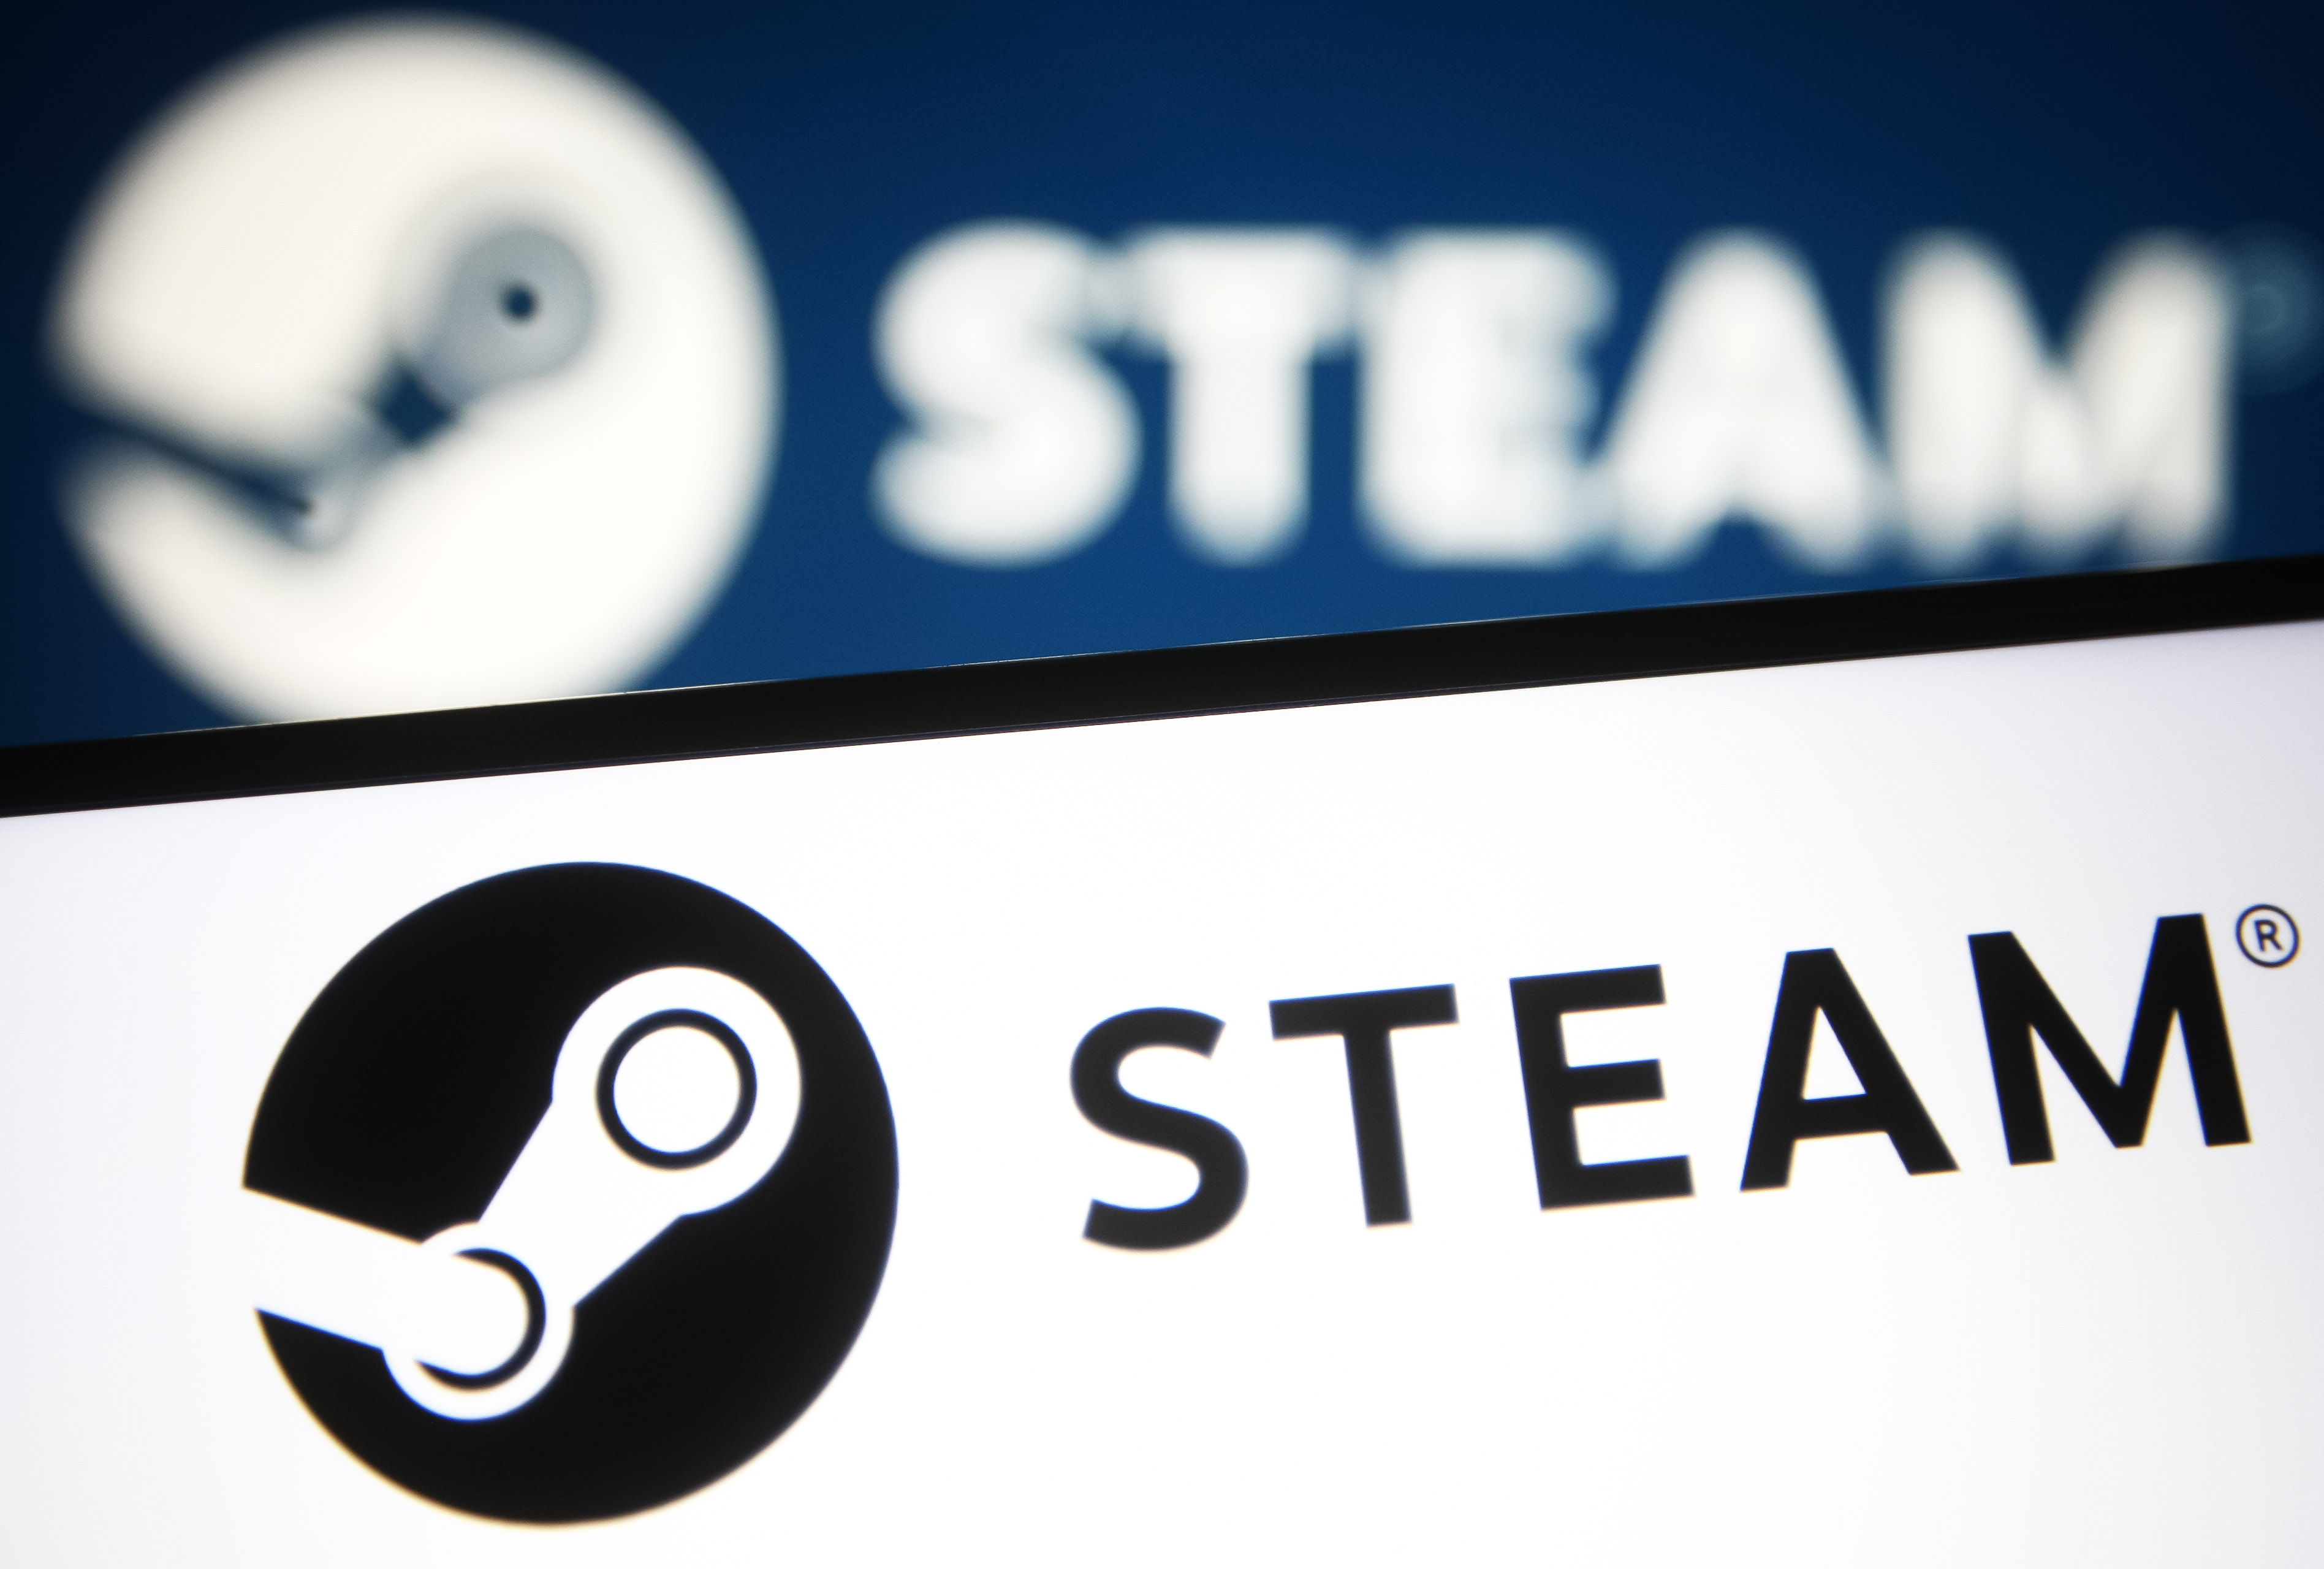 Senator Asks Gabe Newell Why Steam Hosts So Much Neo-Nazi Content